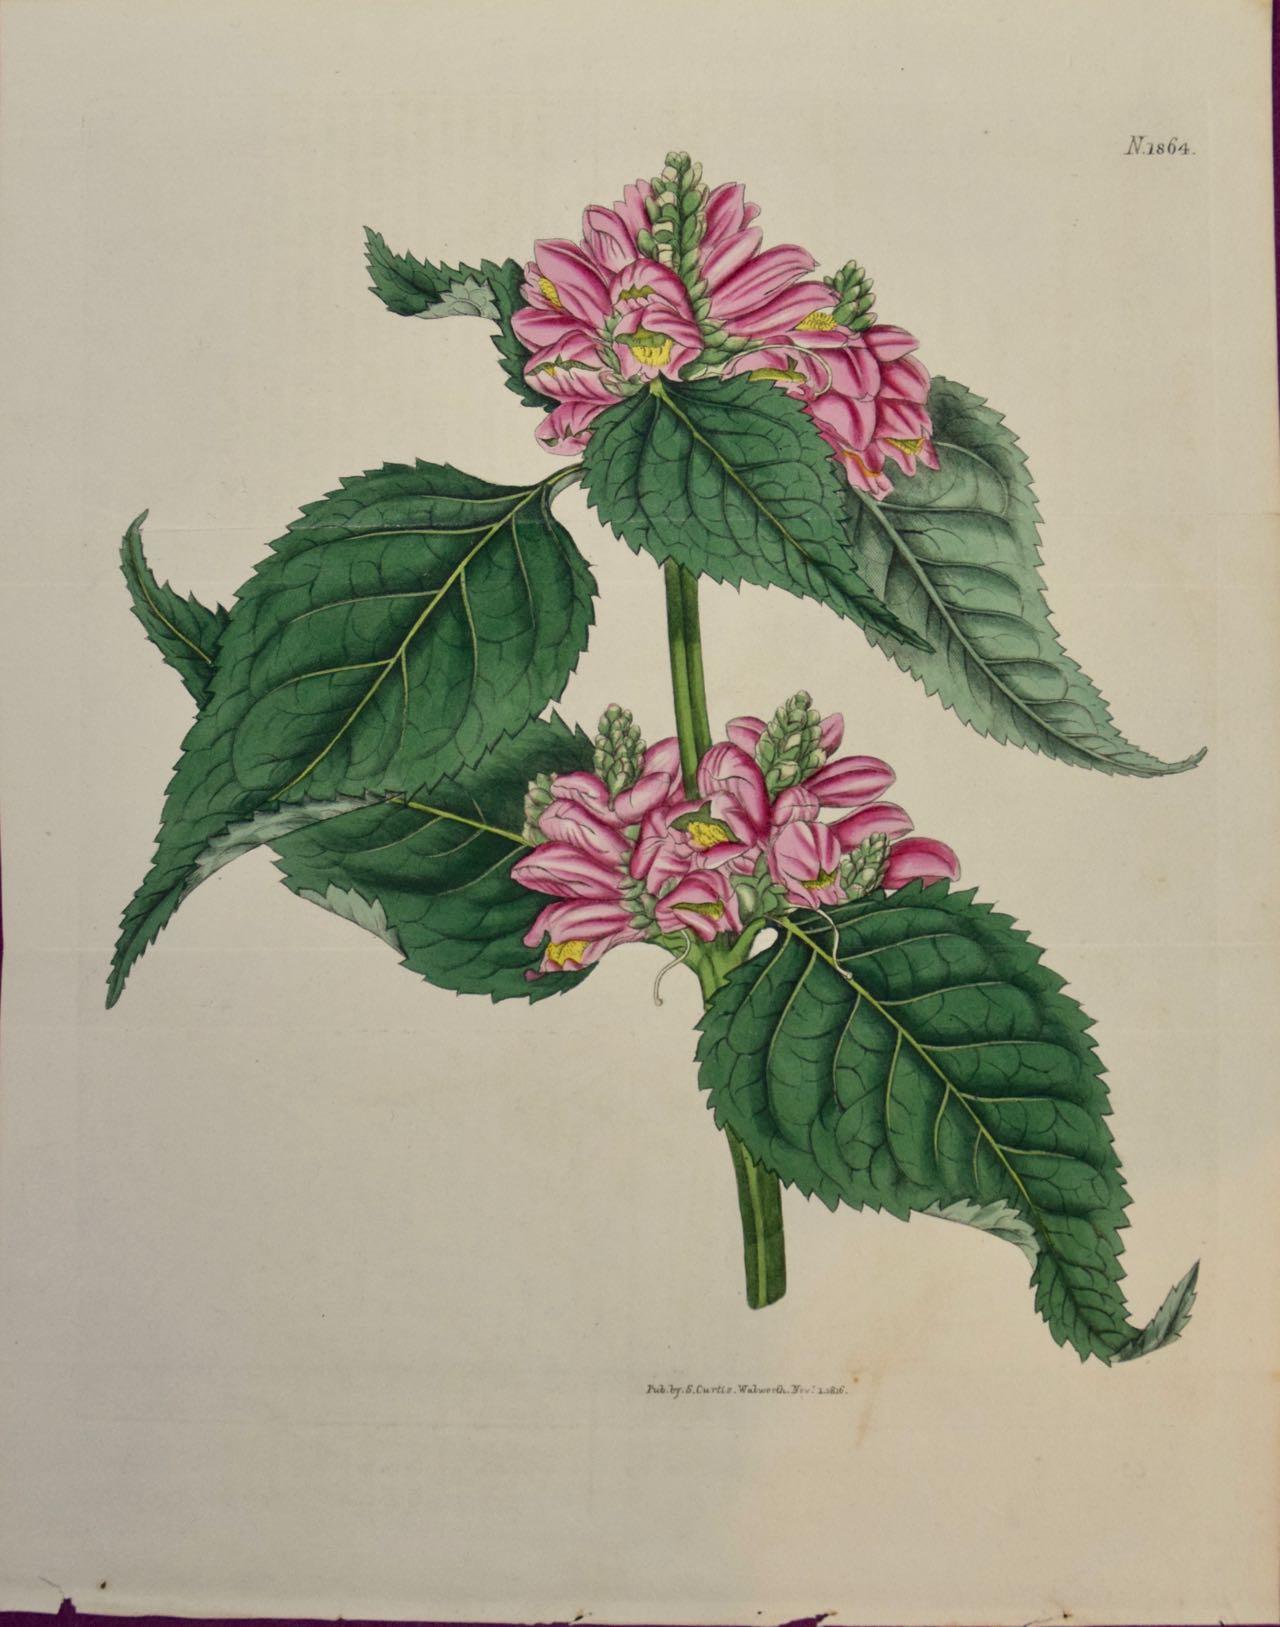 William Curtis Landscape Print - Flowering Lyons' Chelone Botanical: A 19th C. Hand-colored Engraving by Curtis